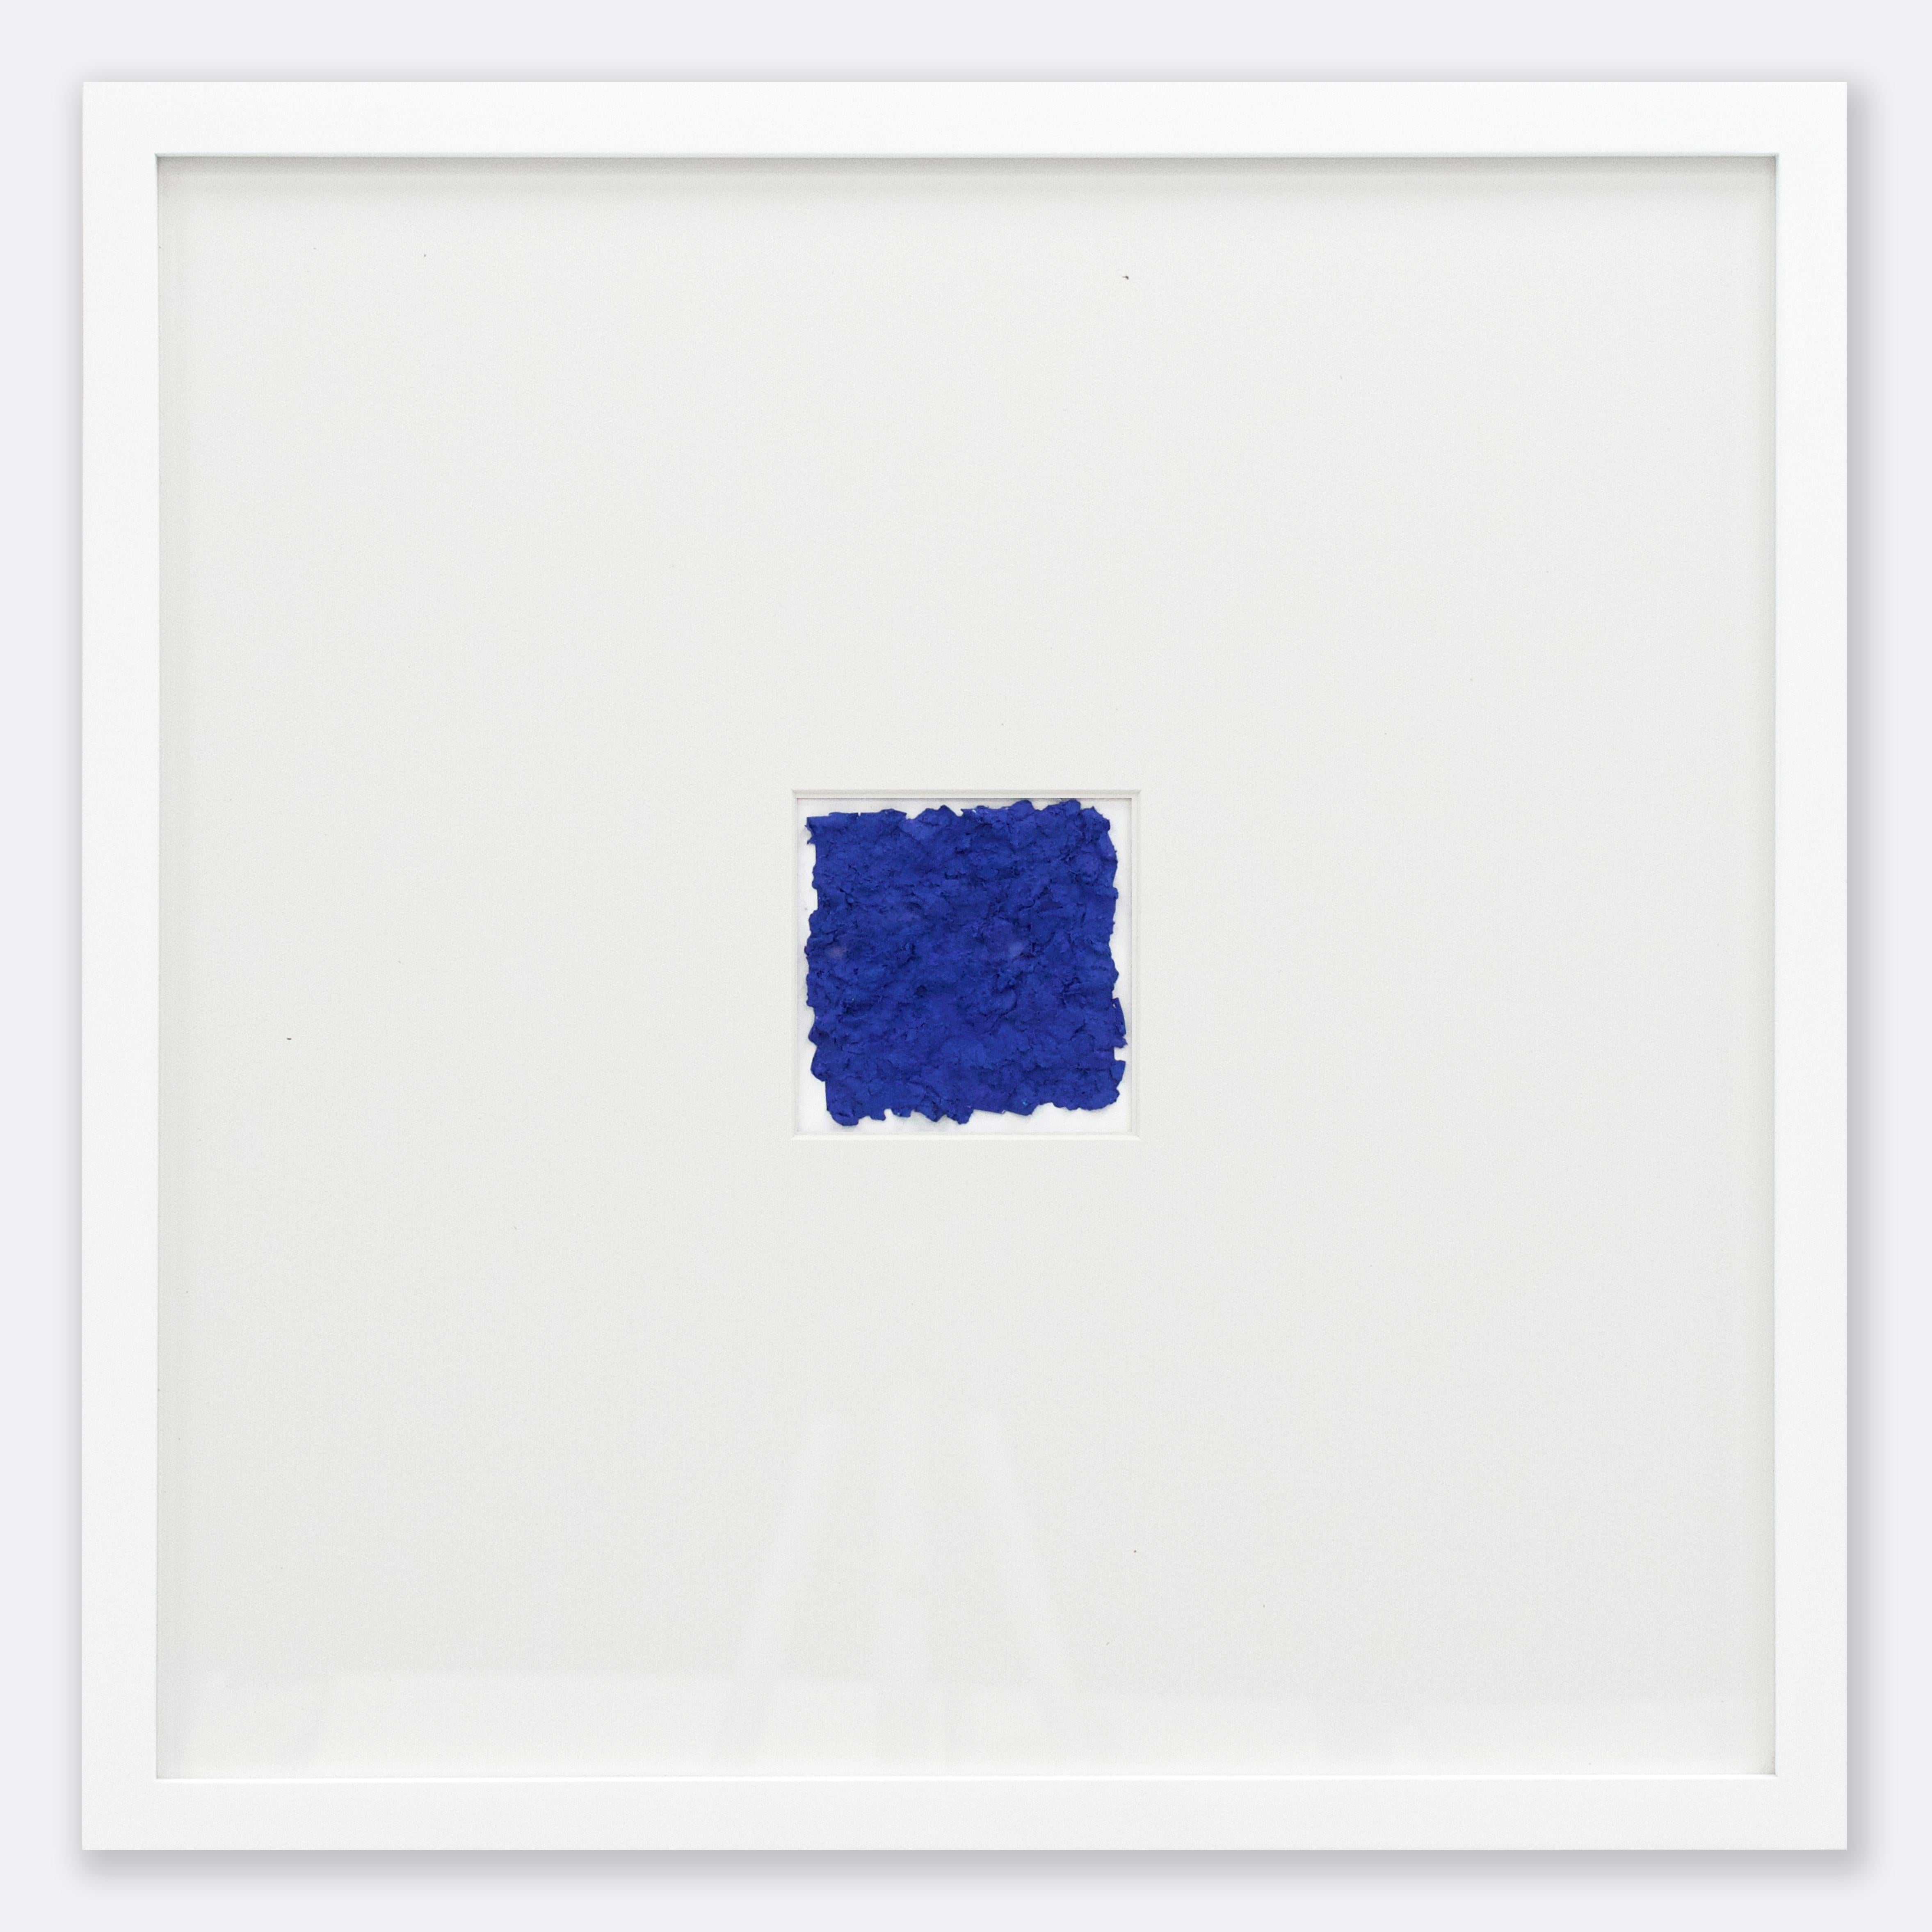 P 200 Series, Cobalt - textured book pages and pigment, framed w/ mat